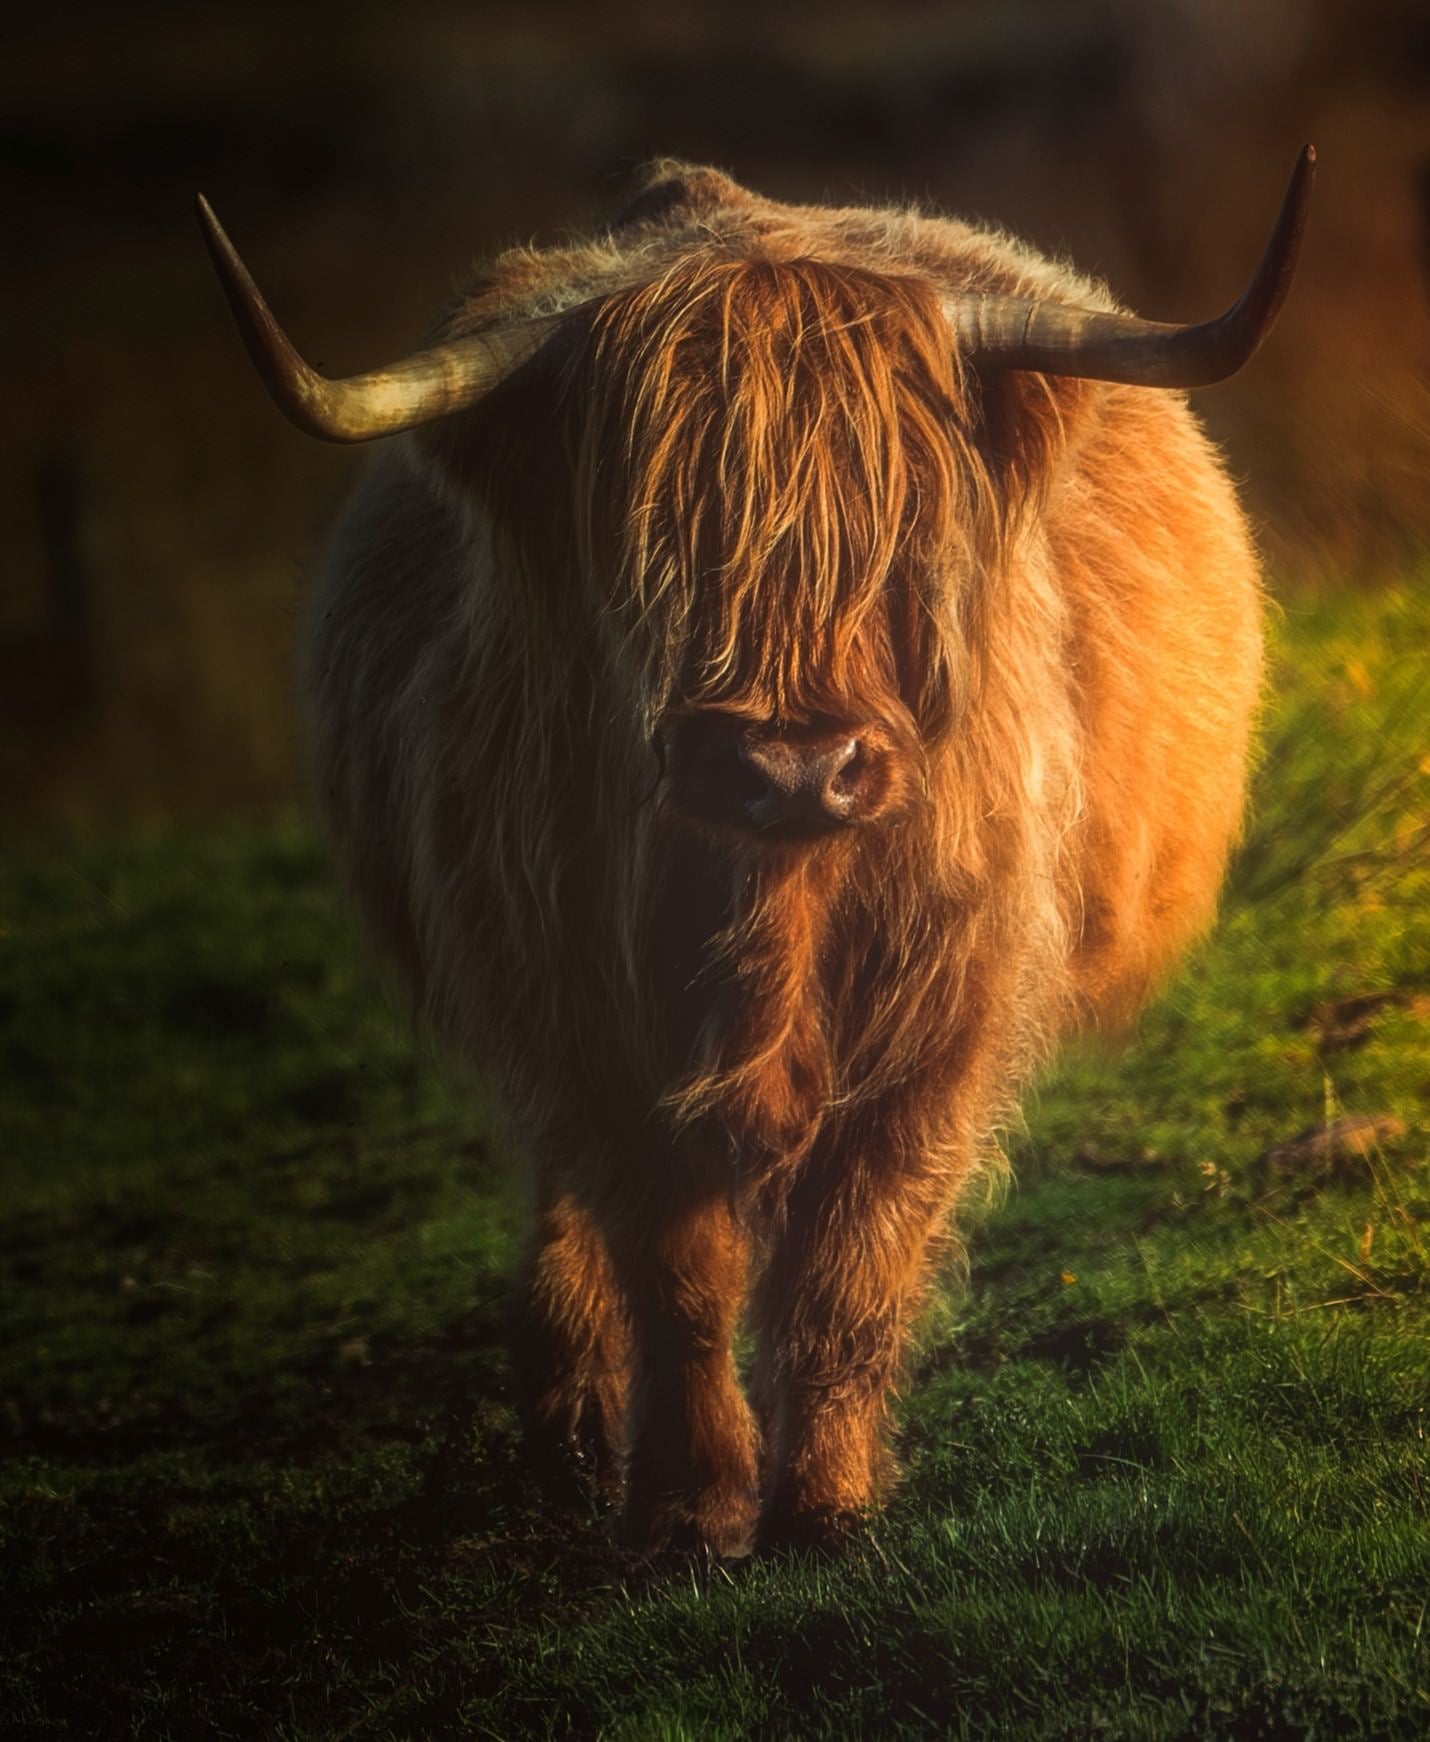 “Majestic fluffiness of a Highland Coo in the Scottish Highlands.” Photo by Raj Bose. Sony Alpha 1. Sony 100-400mm f/4.5-5.6 G Master. 1/500-sec., f/5.6, ISO 100